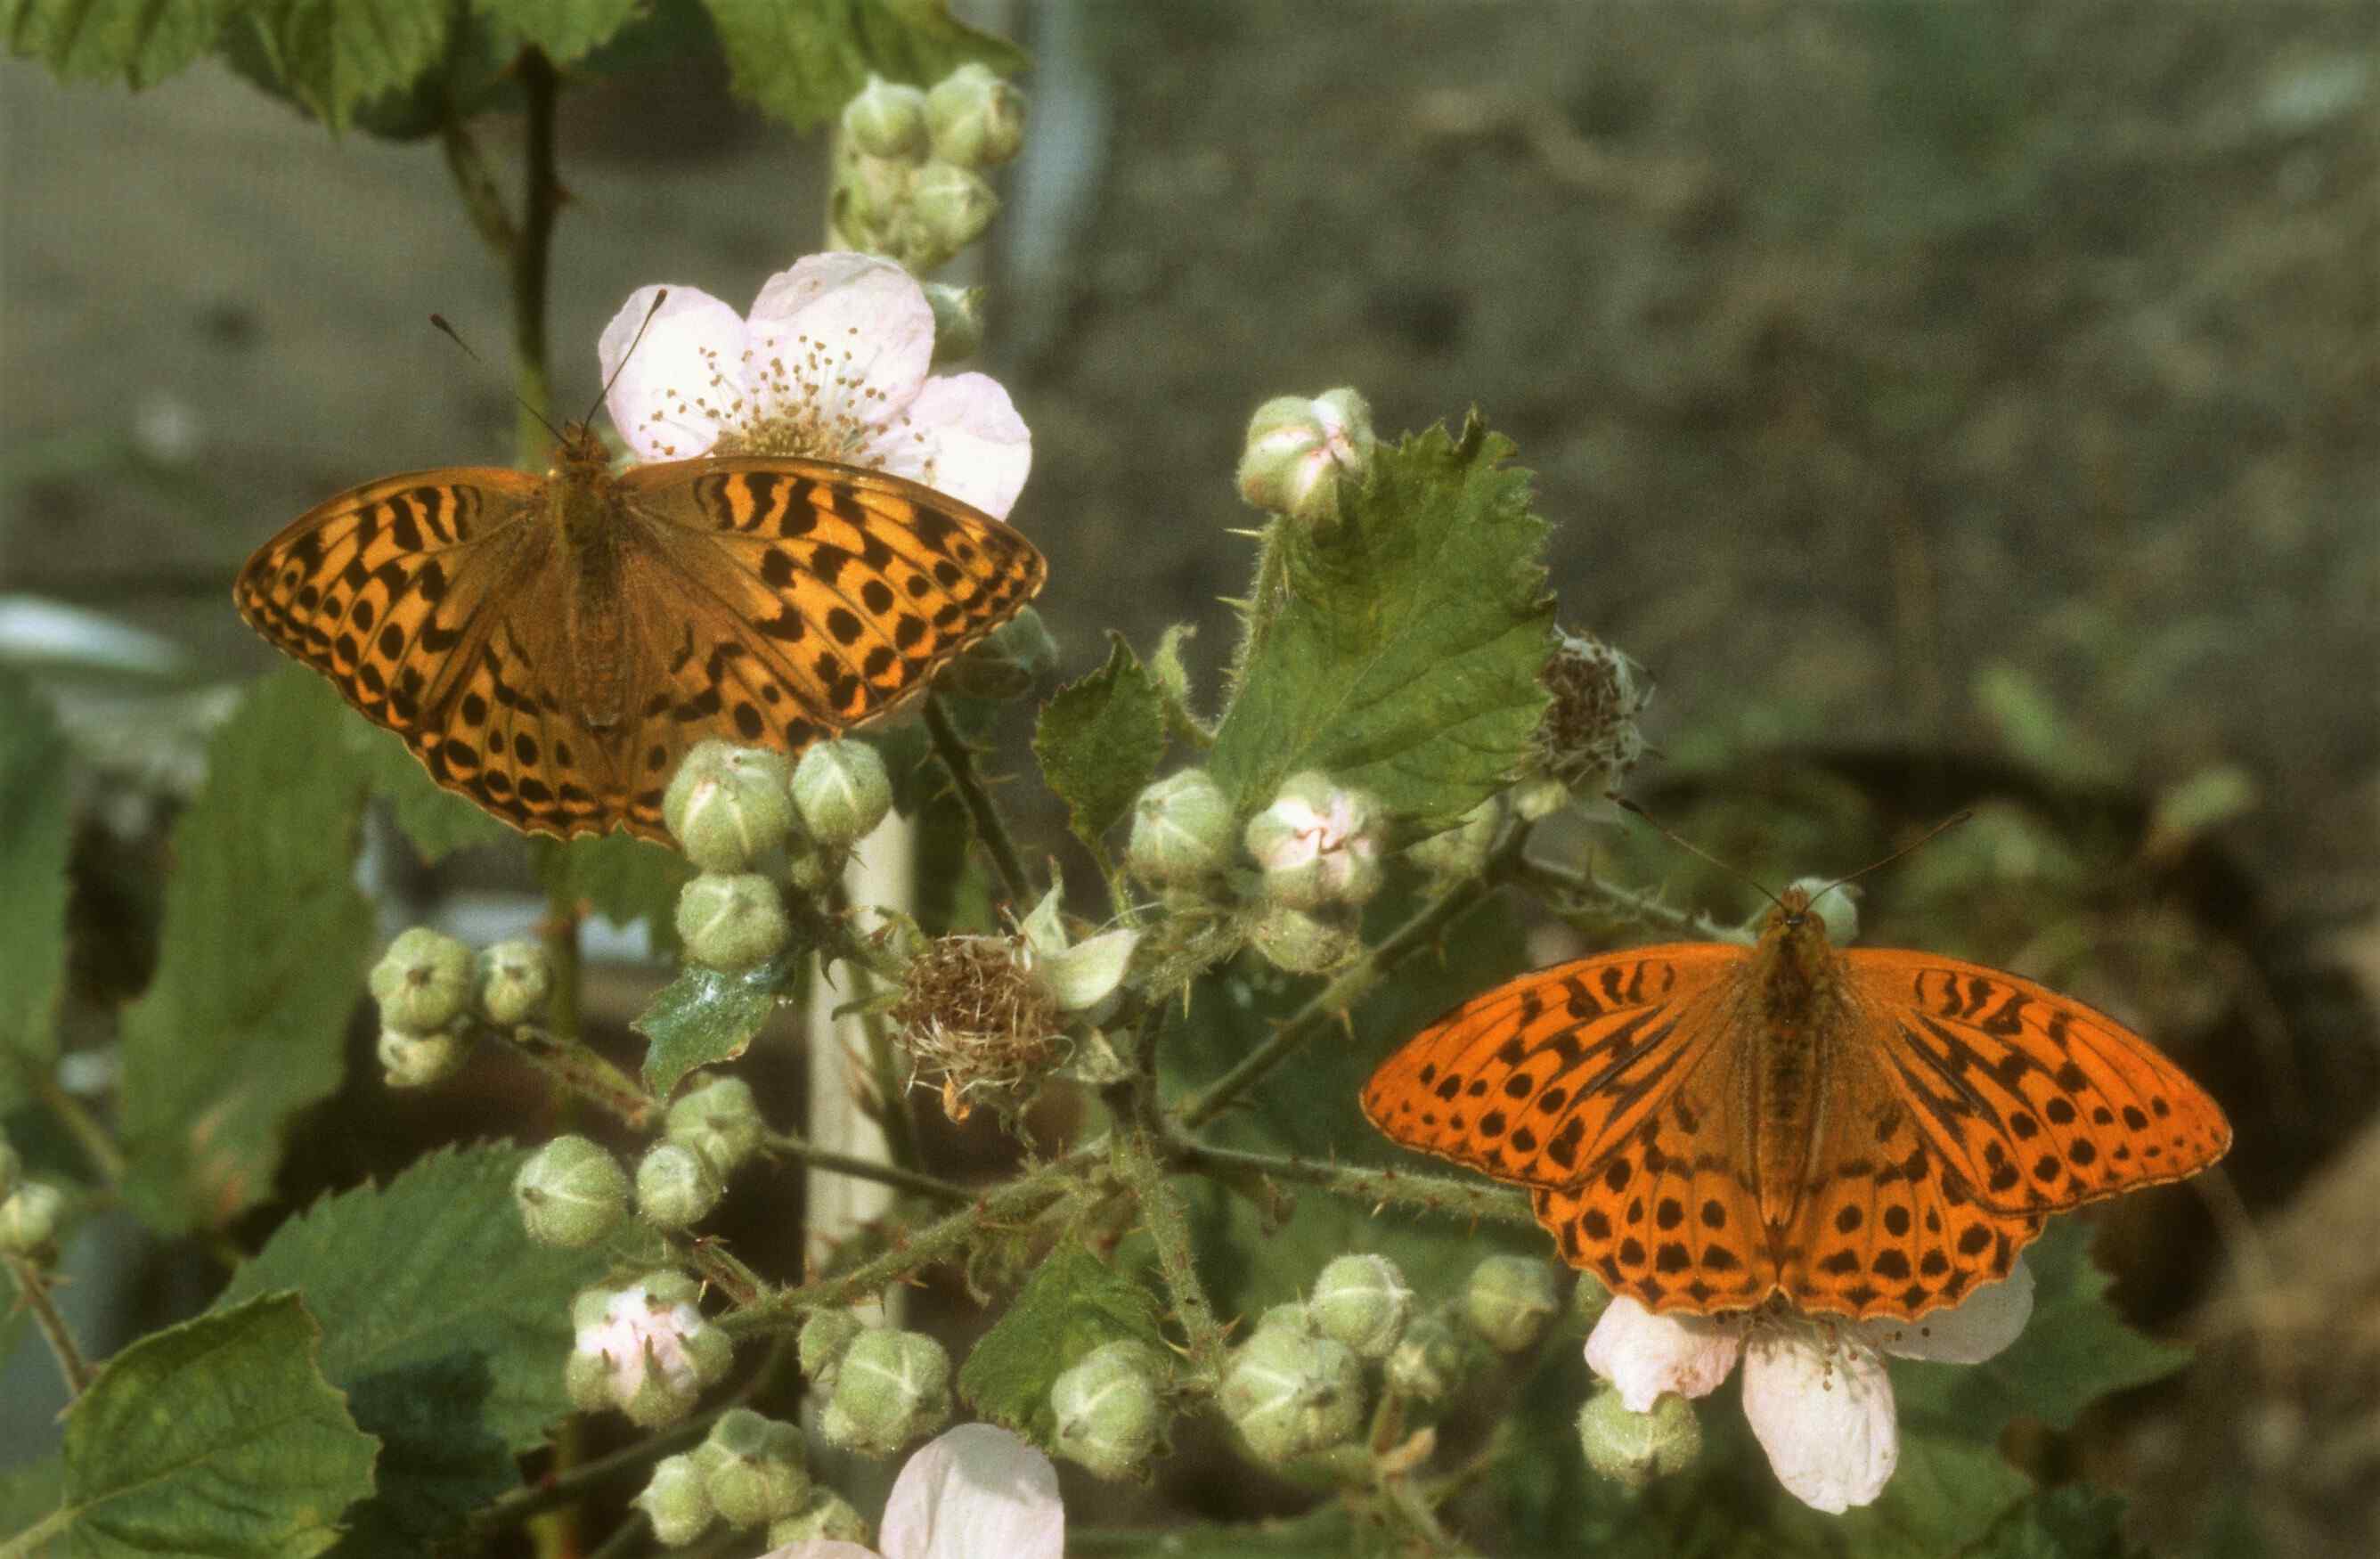 Male and female side by side, the brighter coloured male on the right.